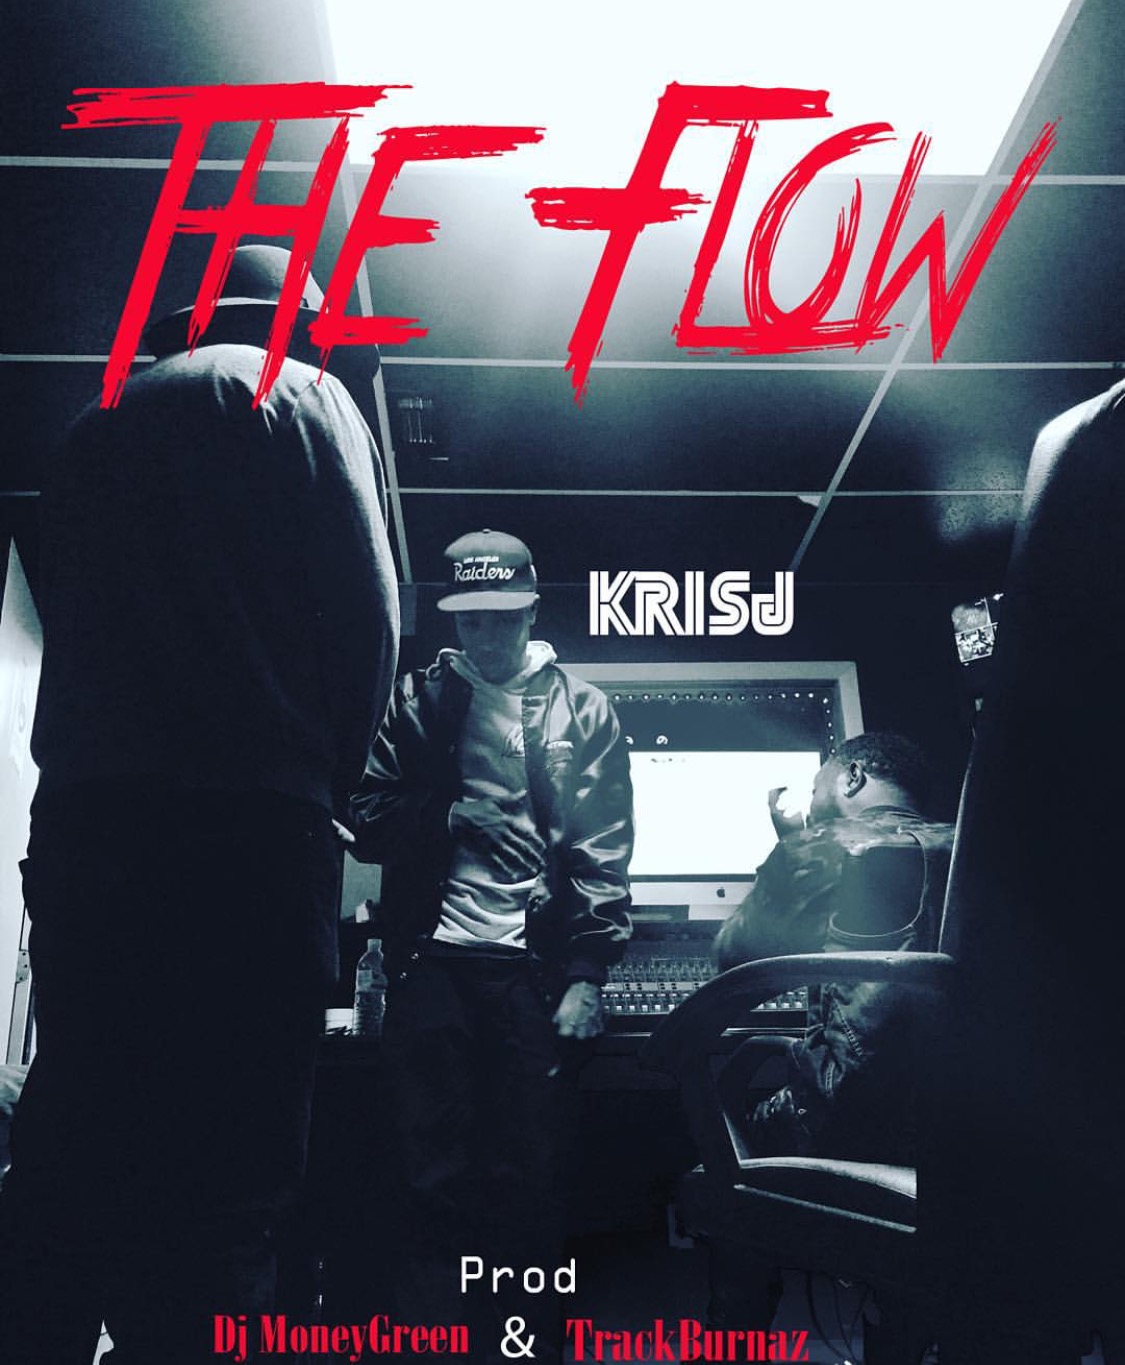 Kris J Continues #MembersOnlyMonday With “The Flow”